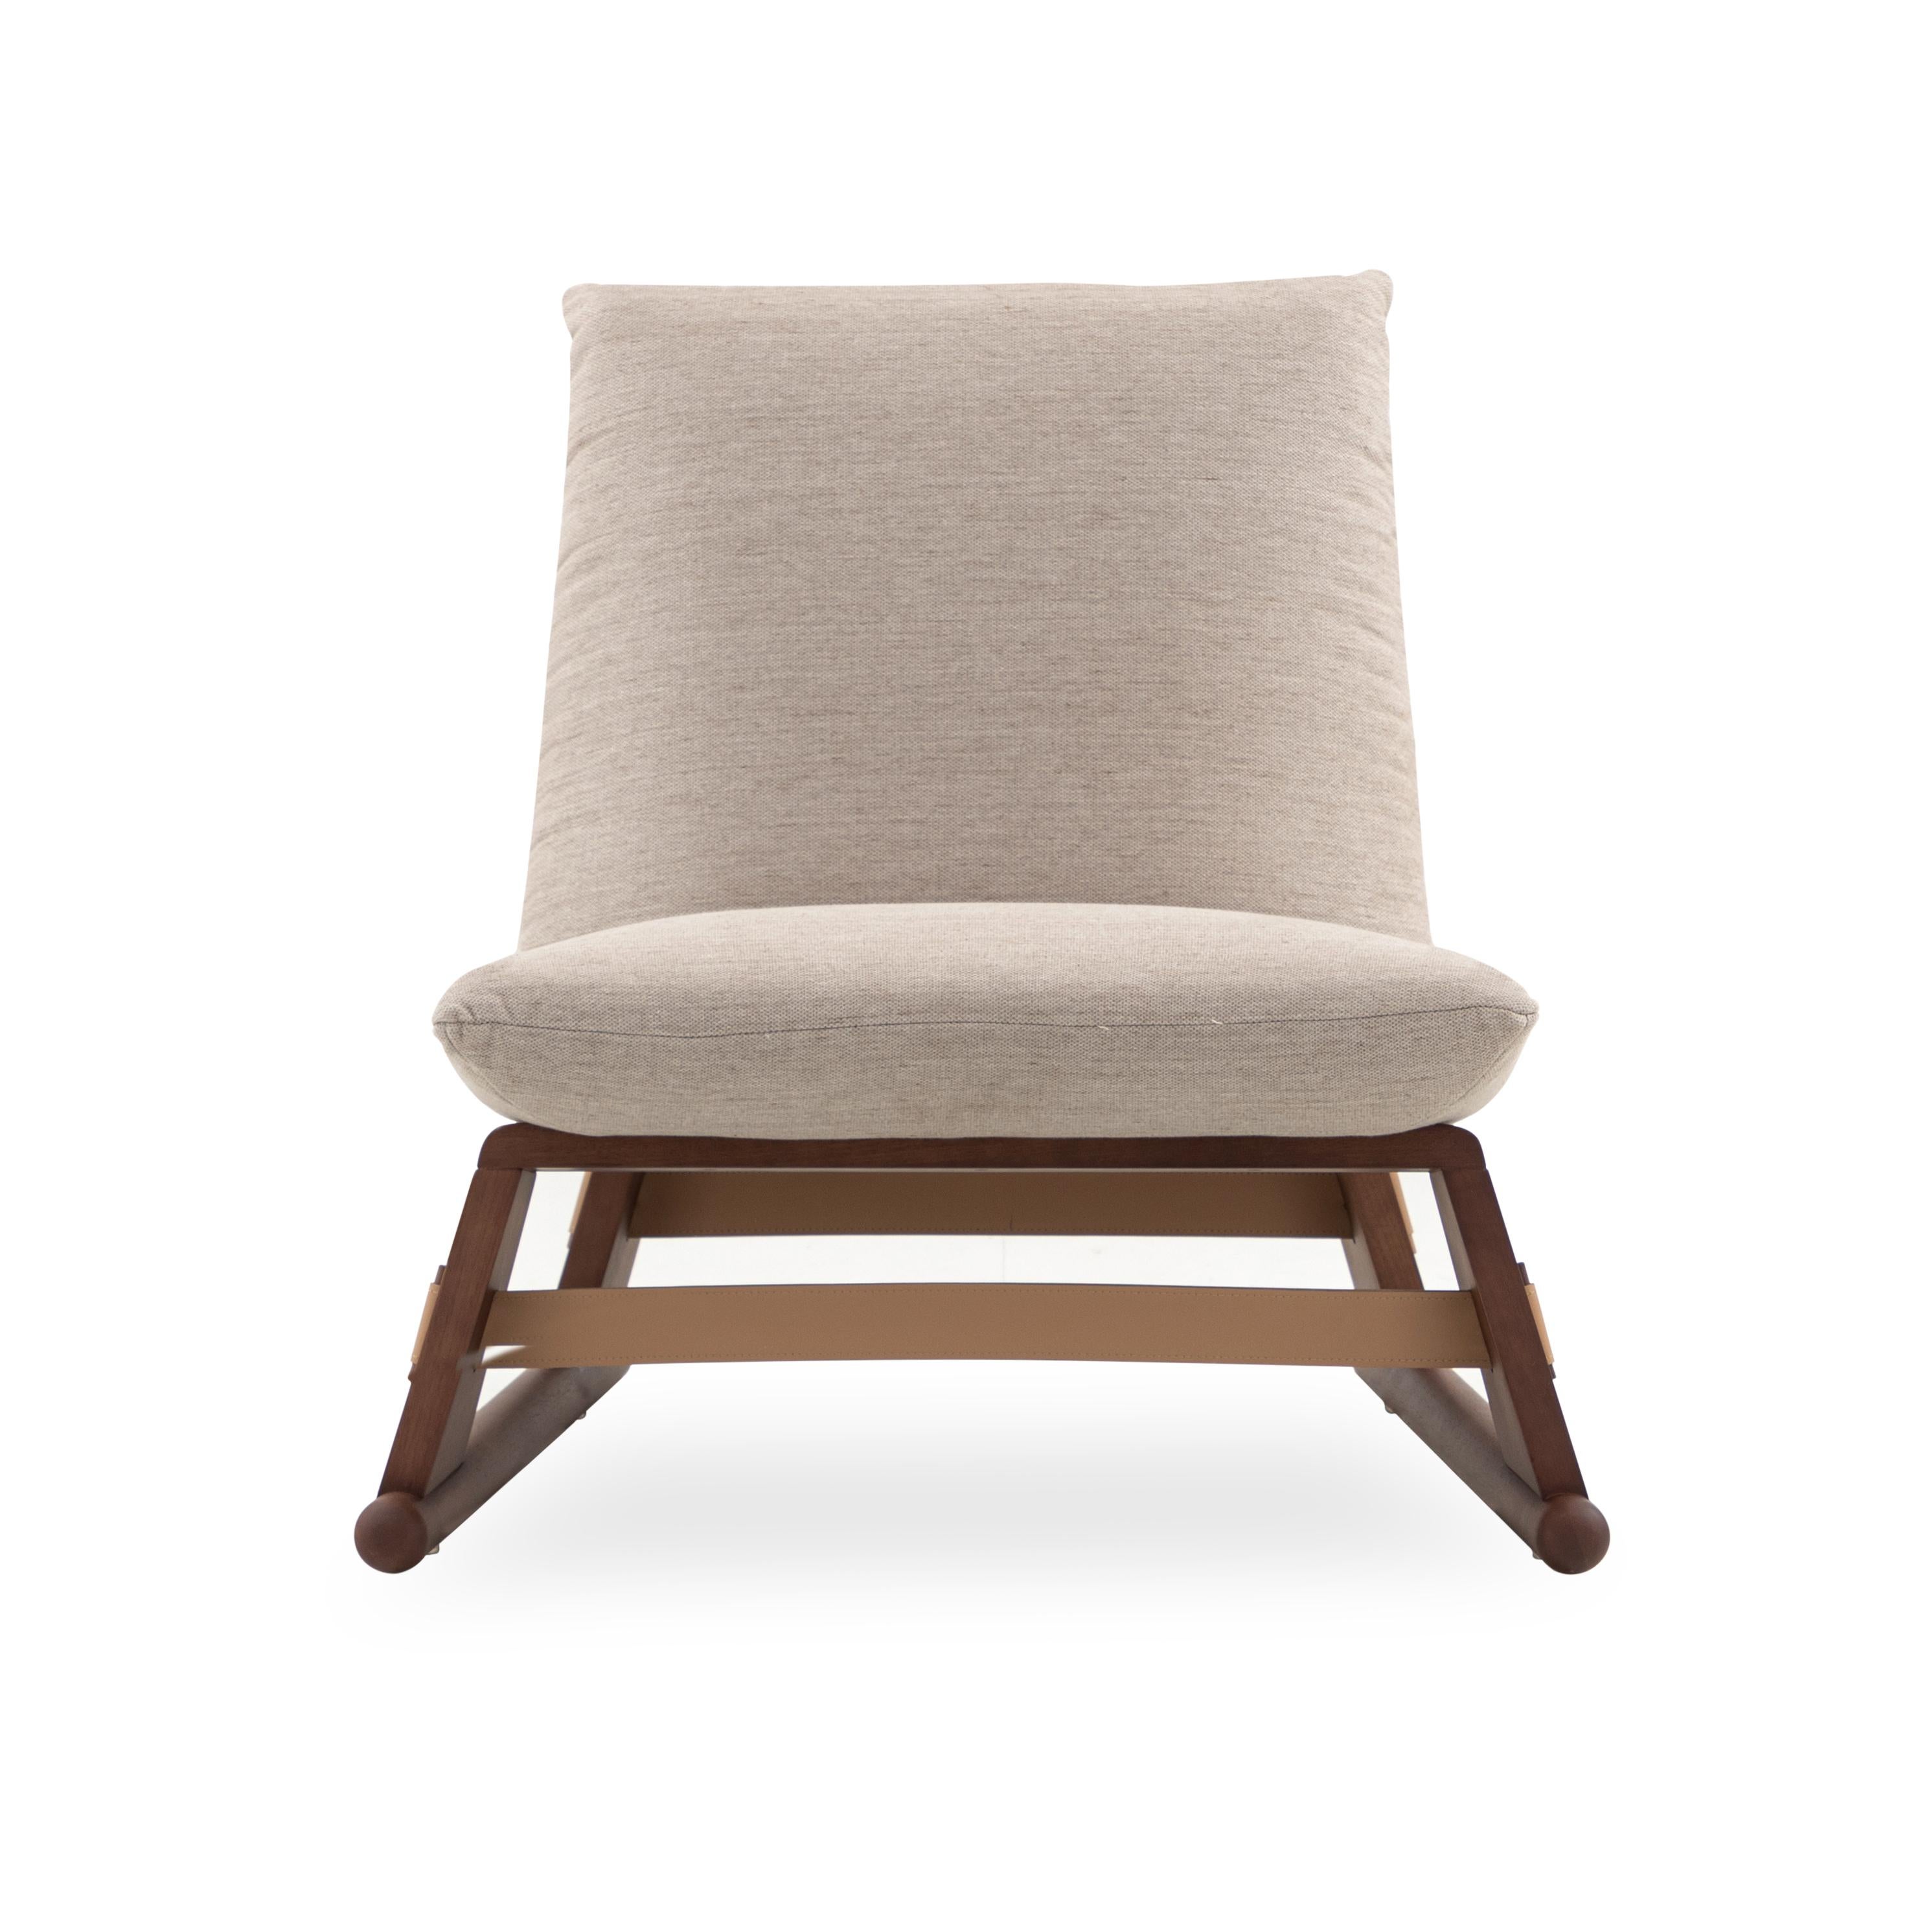 Upholstery Contemporary Maia Chair in Walnut Wood Finish Frame and Light Beige Fabric For Sale